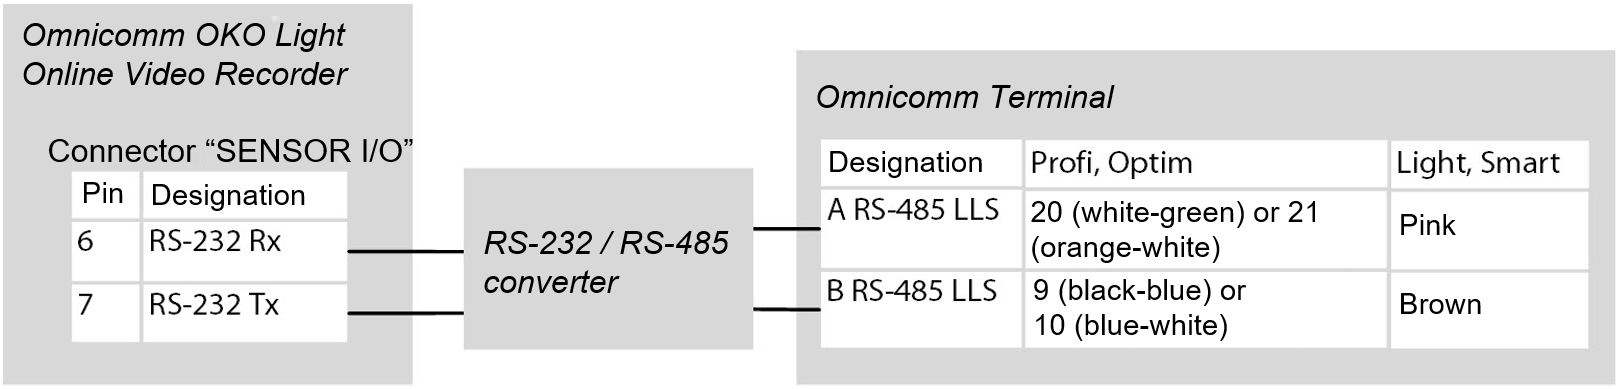 Connection to Omnicomm Terminals 